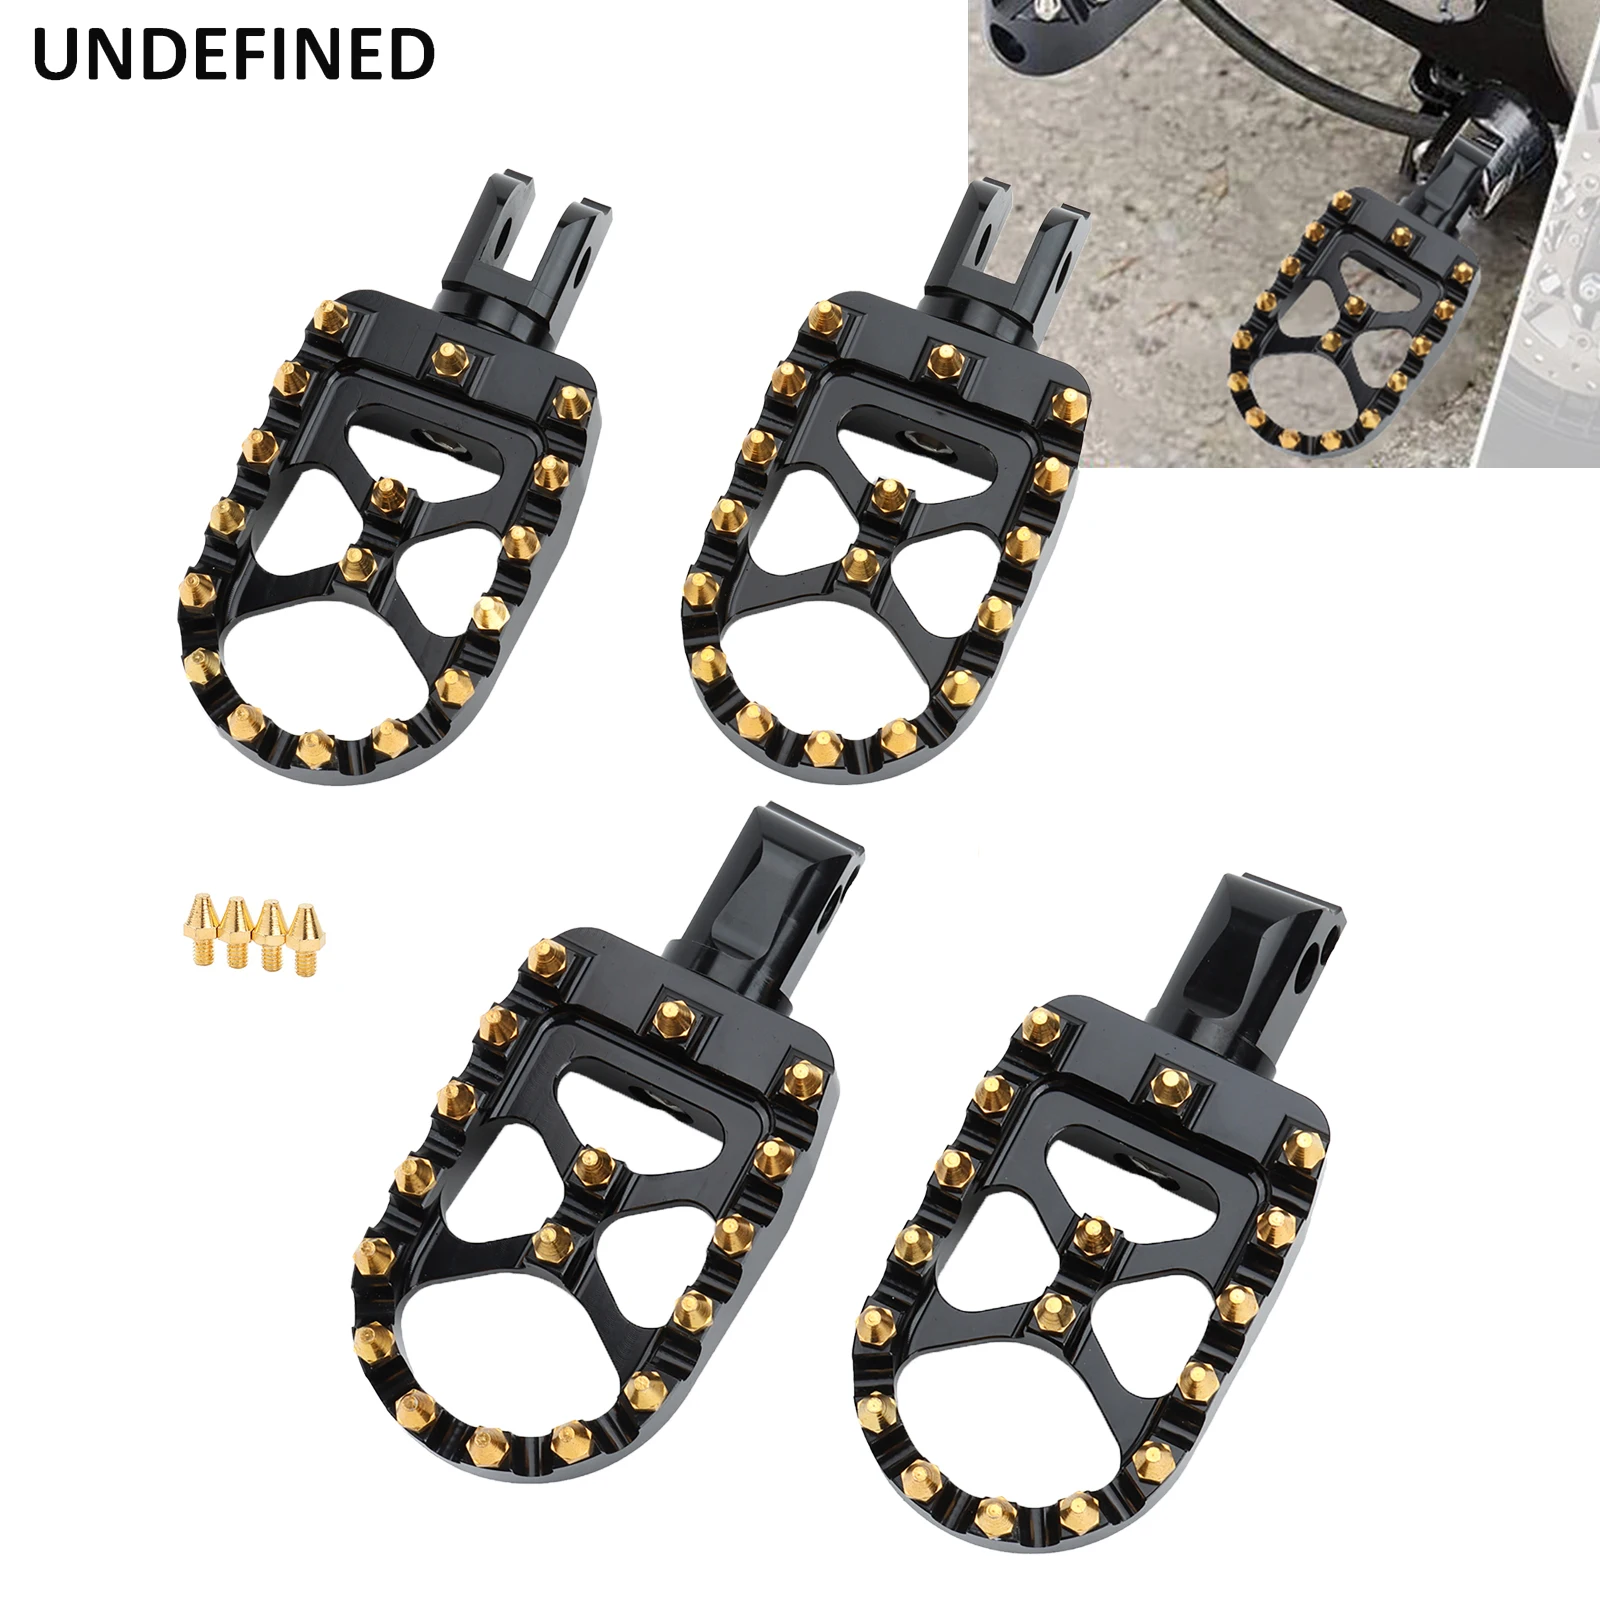 MX Wide Foot Pegs Motorcycle Front Rear Footrests Black Chrome For Harley - $55.16+